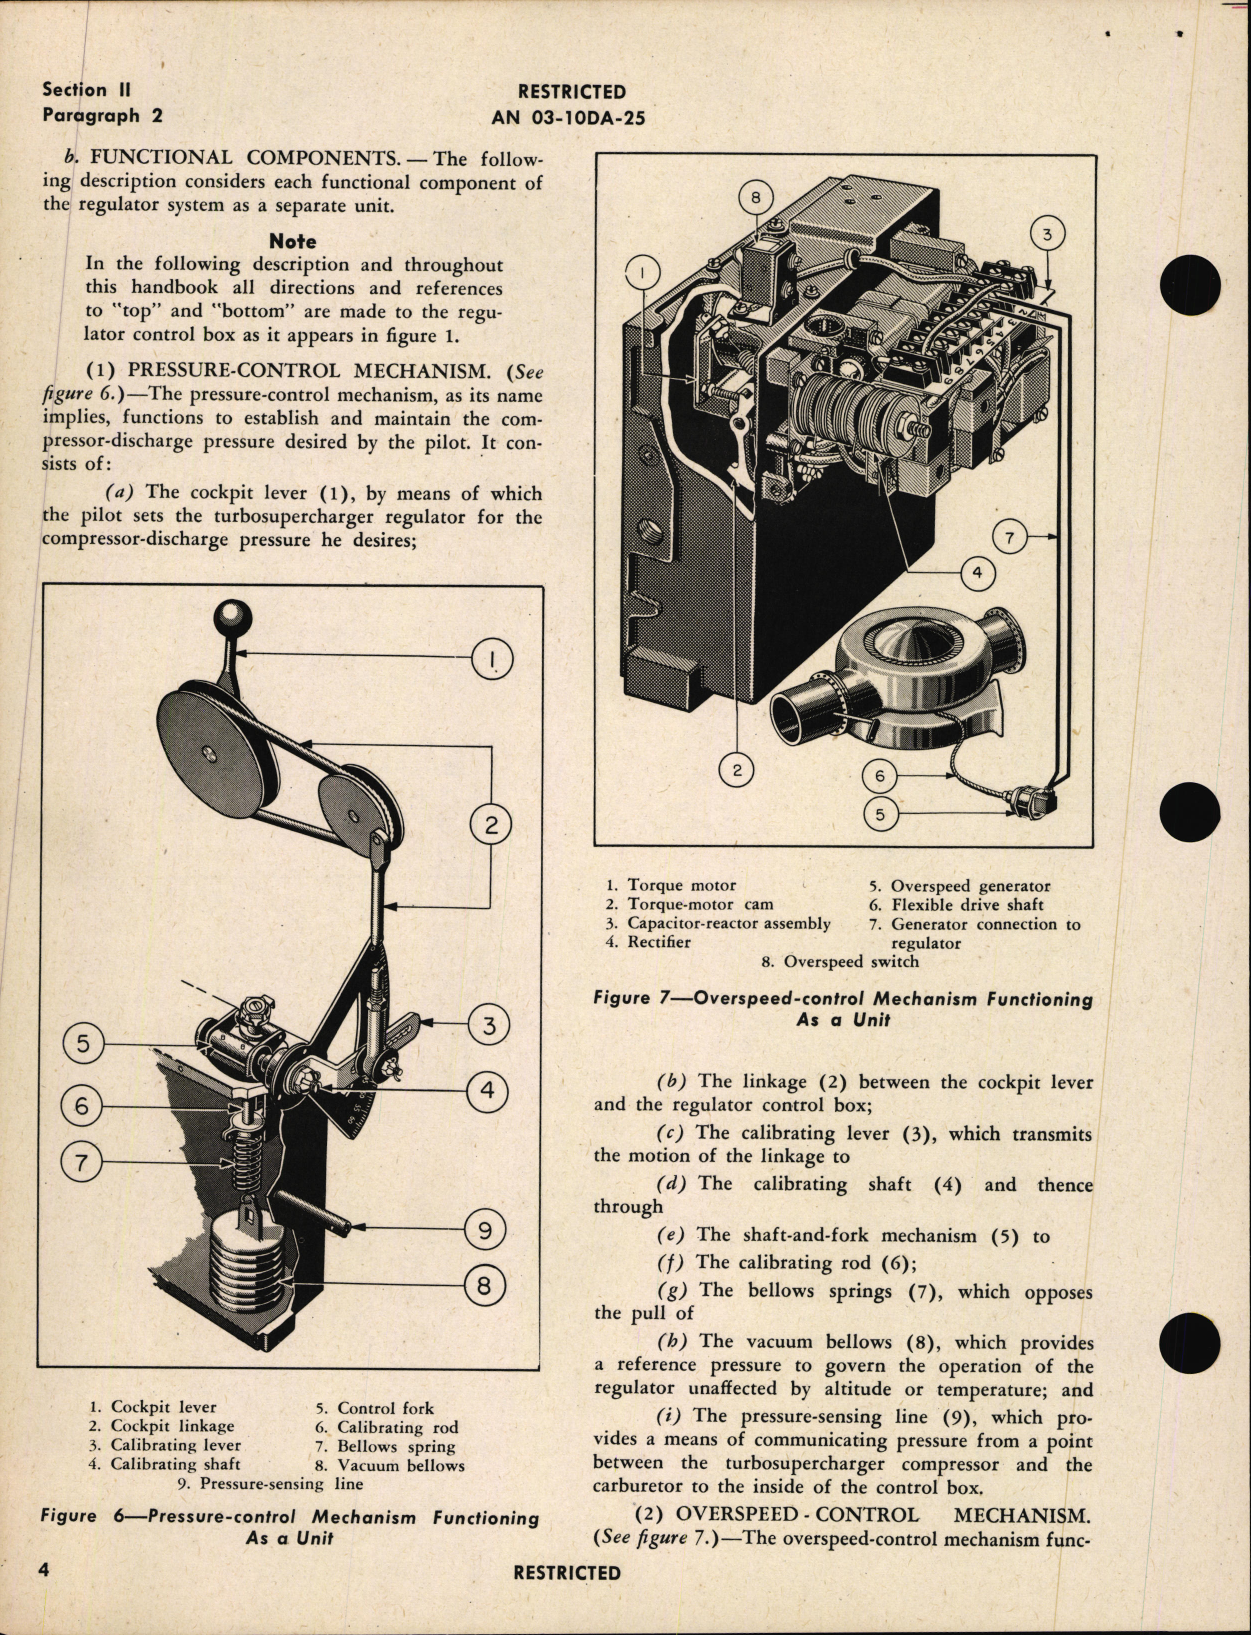 Sample page 8 from AirCorps Library document: Handbook of Instructions with Parts Catalog for Type C-2A Electric Regulator Turbosupercharger Model 3GPR7B1